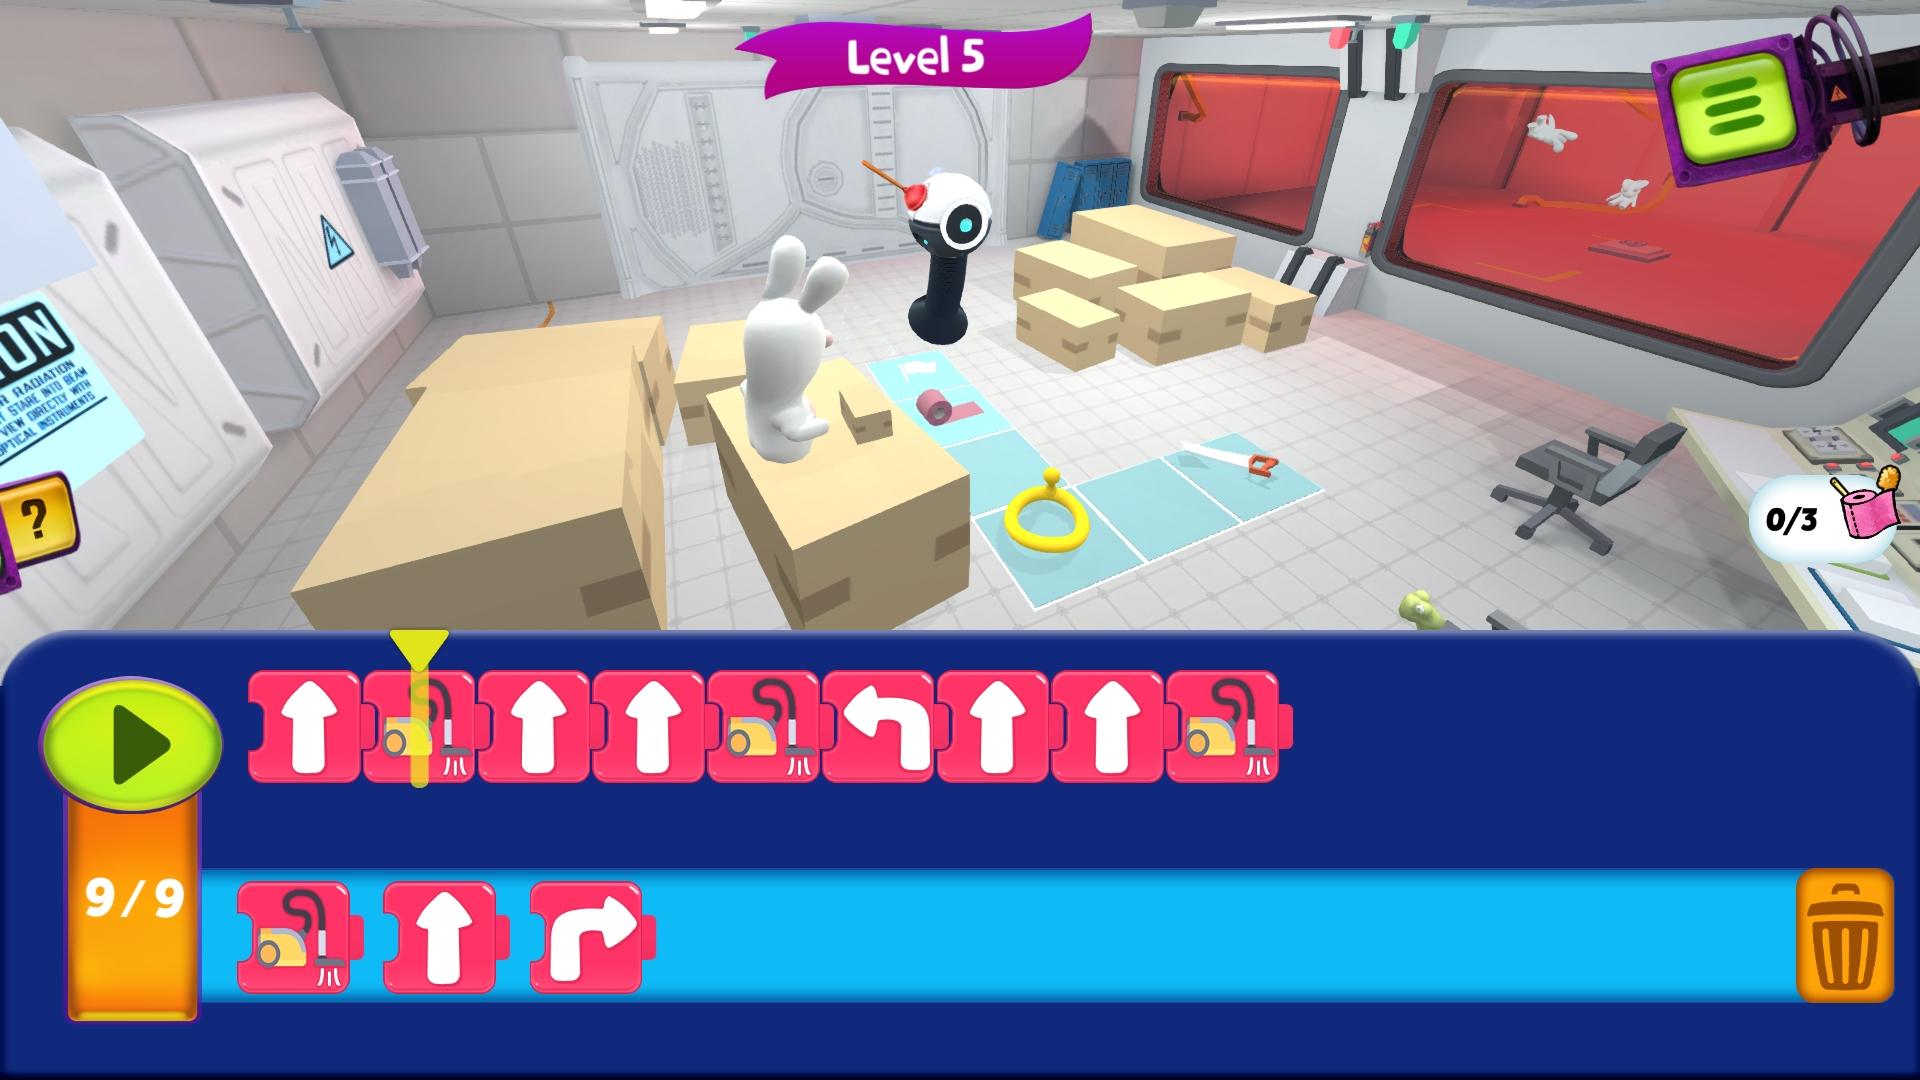 Rabbids Coding! for Android